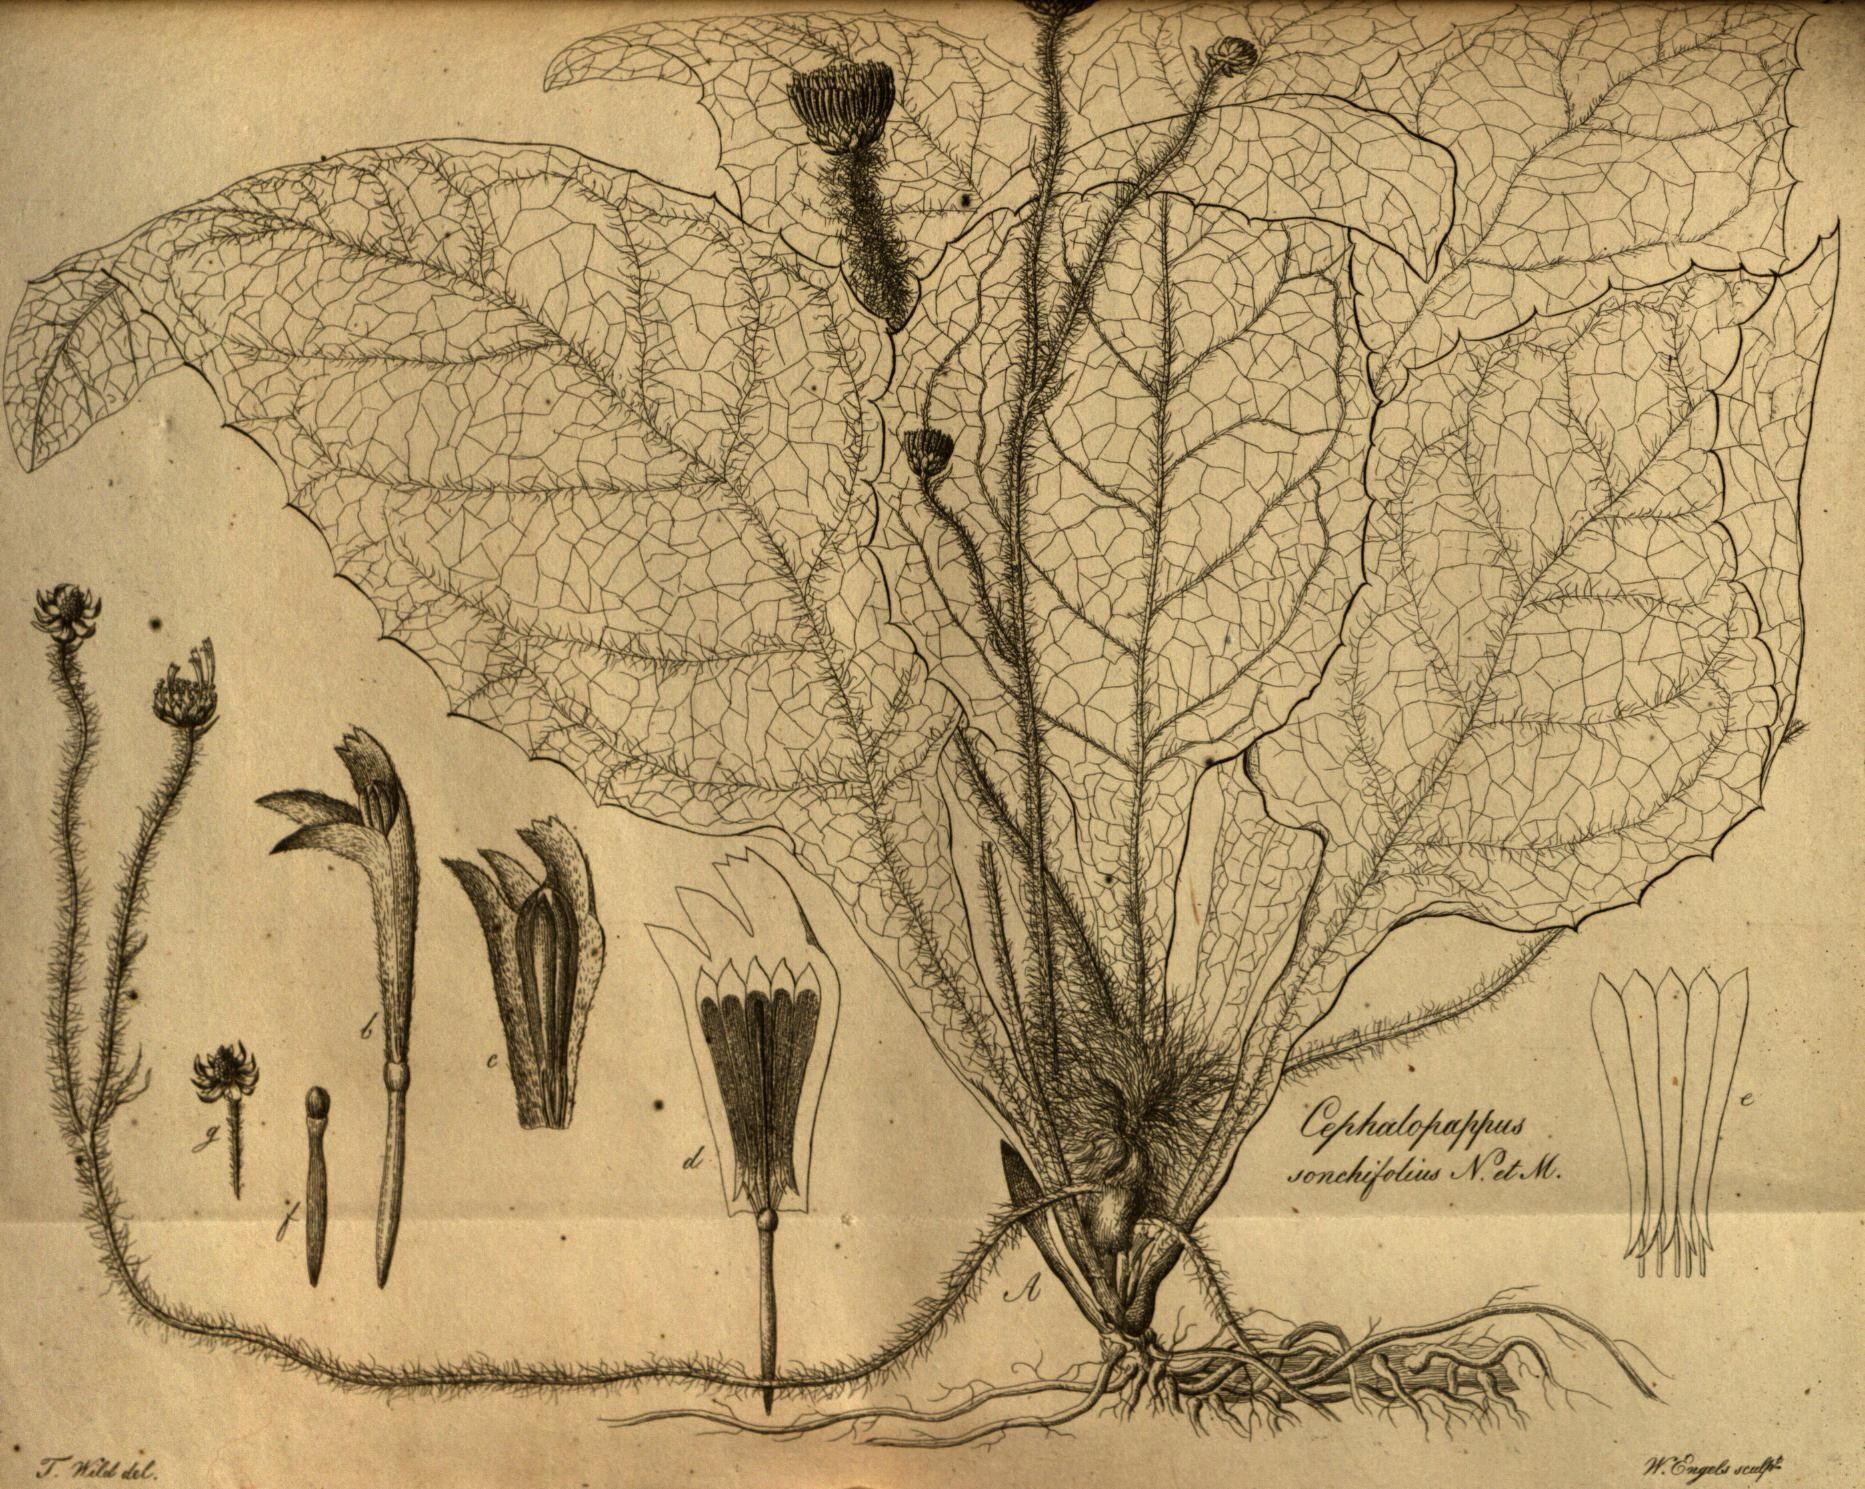 an old - fashioned drawing of plants, including two large leaves and a plant sprout, is shown in black